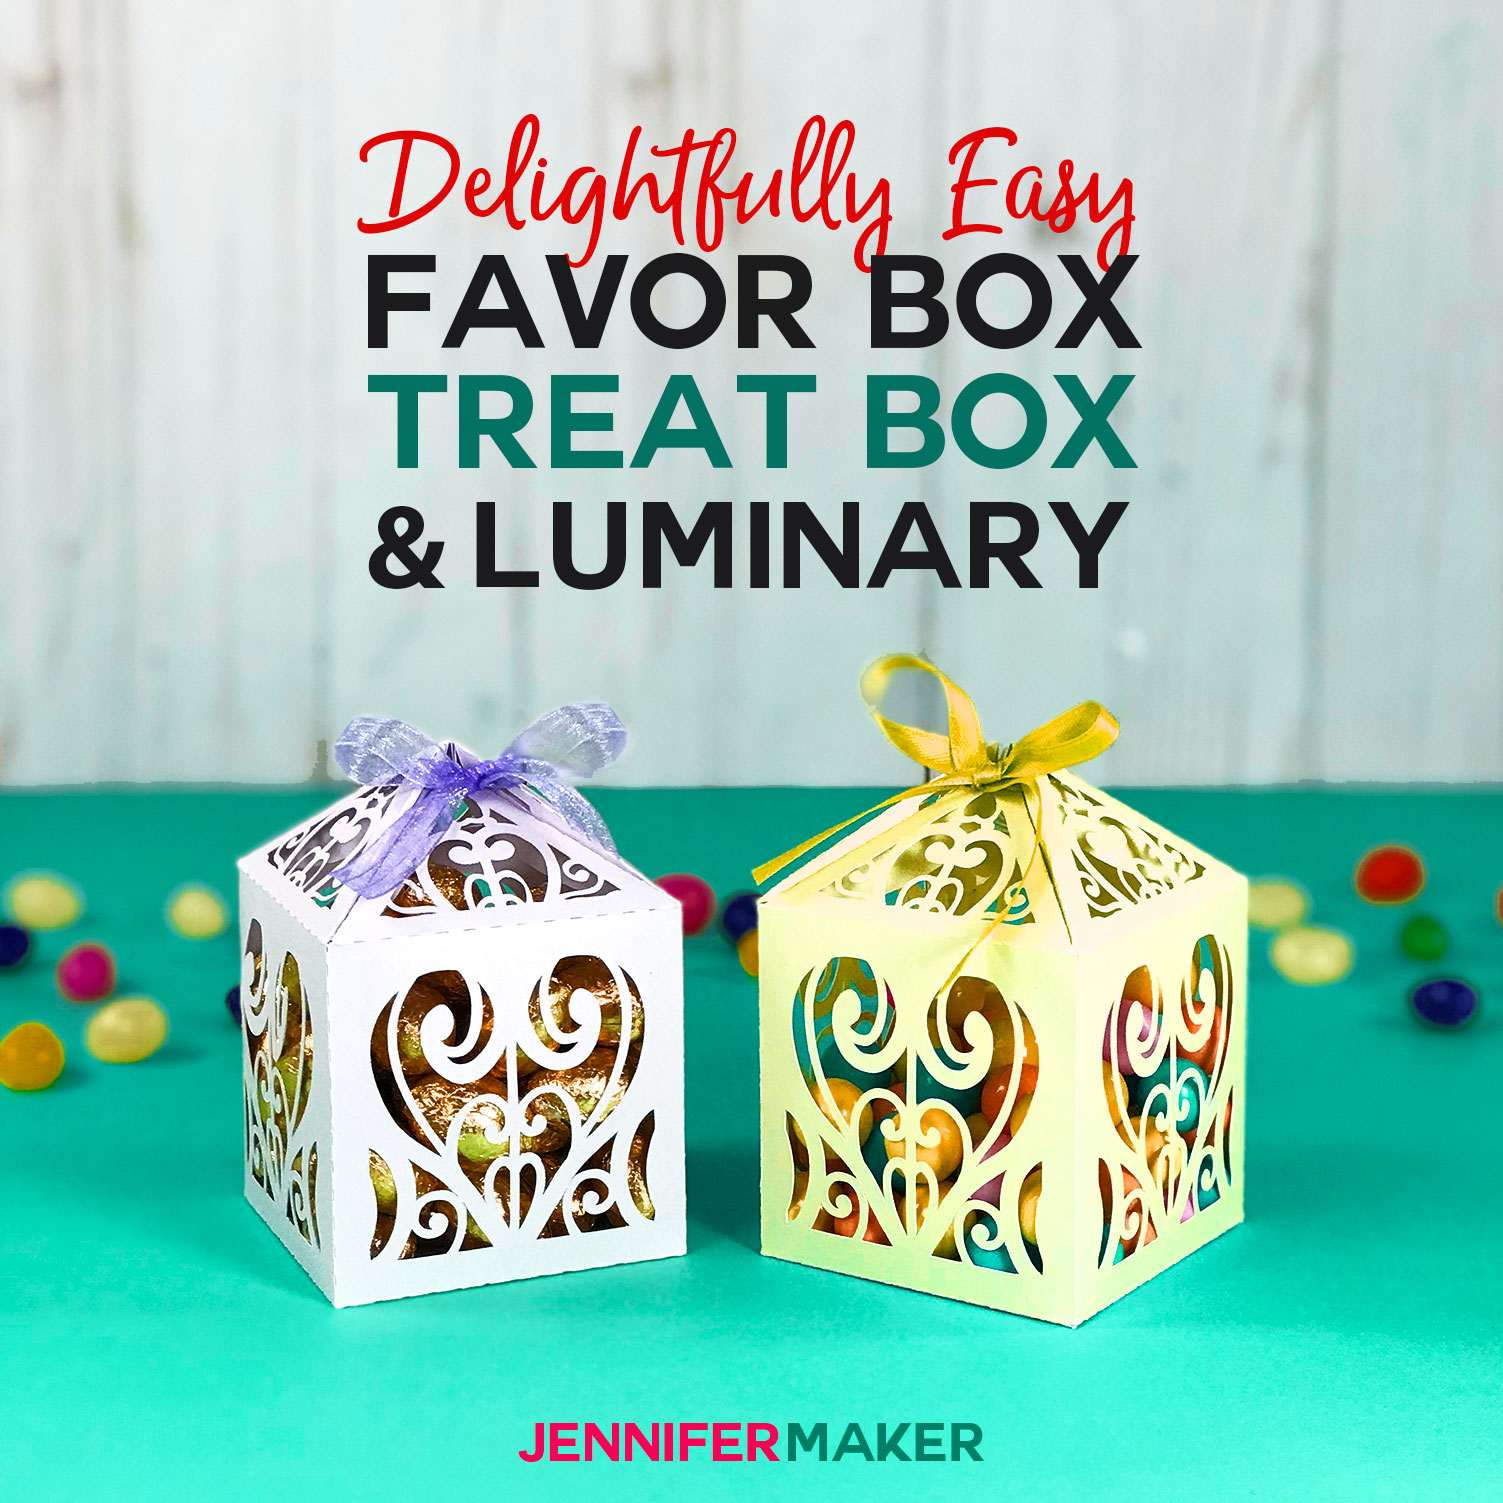 Make these DIY favor boxes for weddings, treat boxes for holidays, and paper luminaries for whenever! Includes a free filigree box template #svgcutfile #cricut #weddings #papercraft